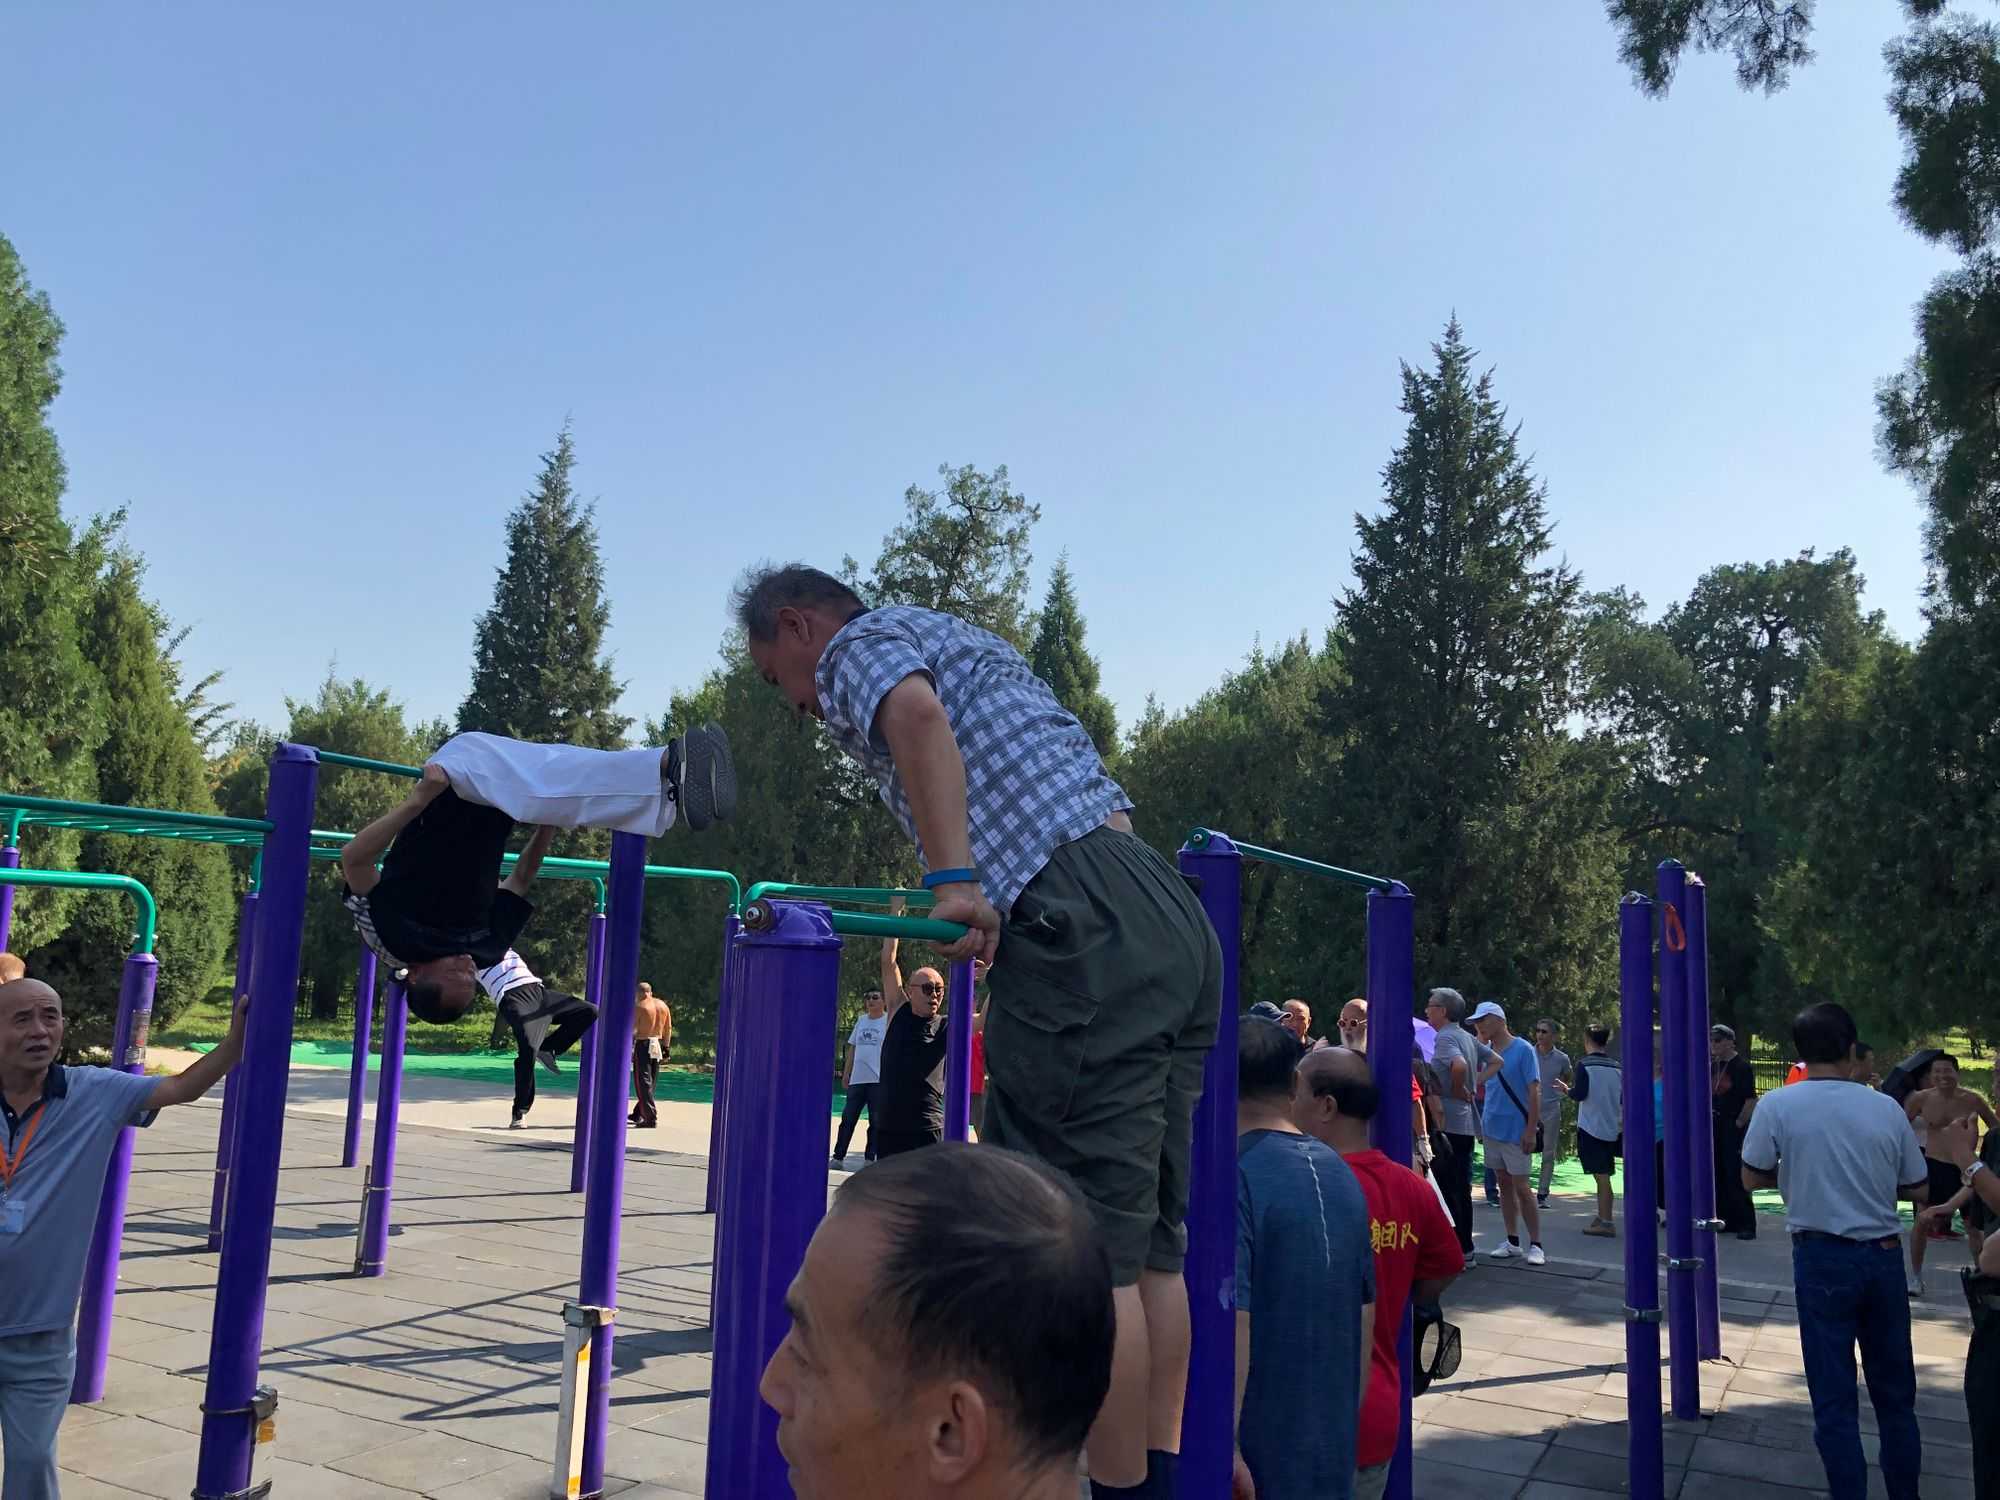 Temple of Heaven Park. Elderly gymnasts with amazing skills. (Image by author)